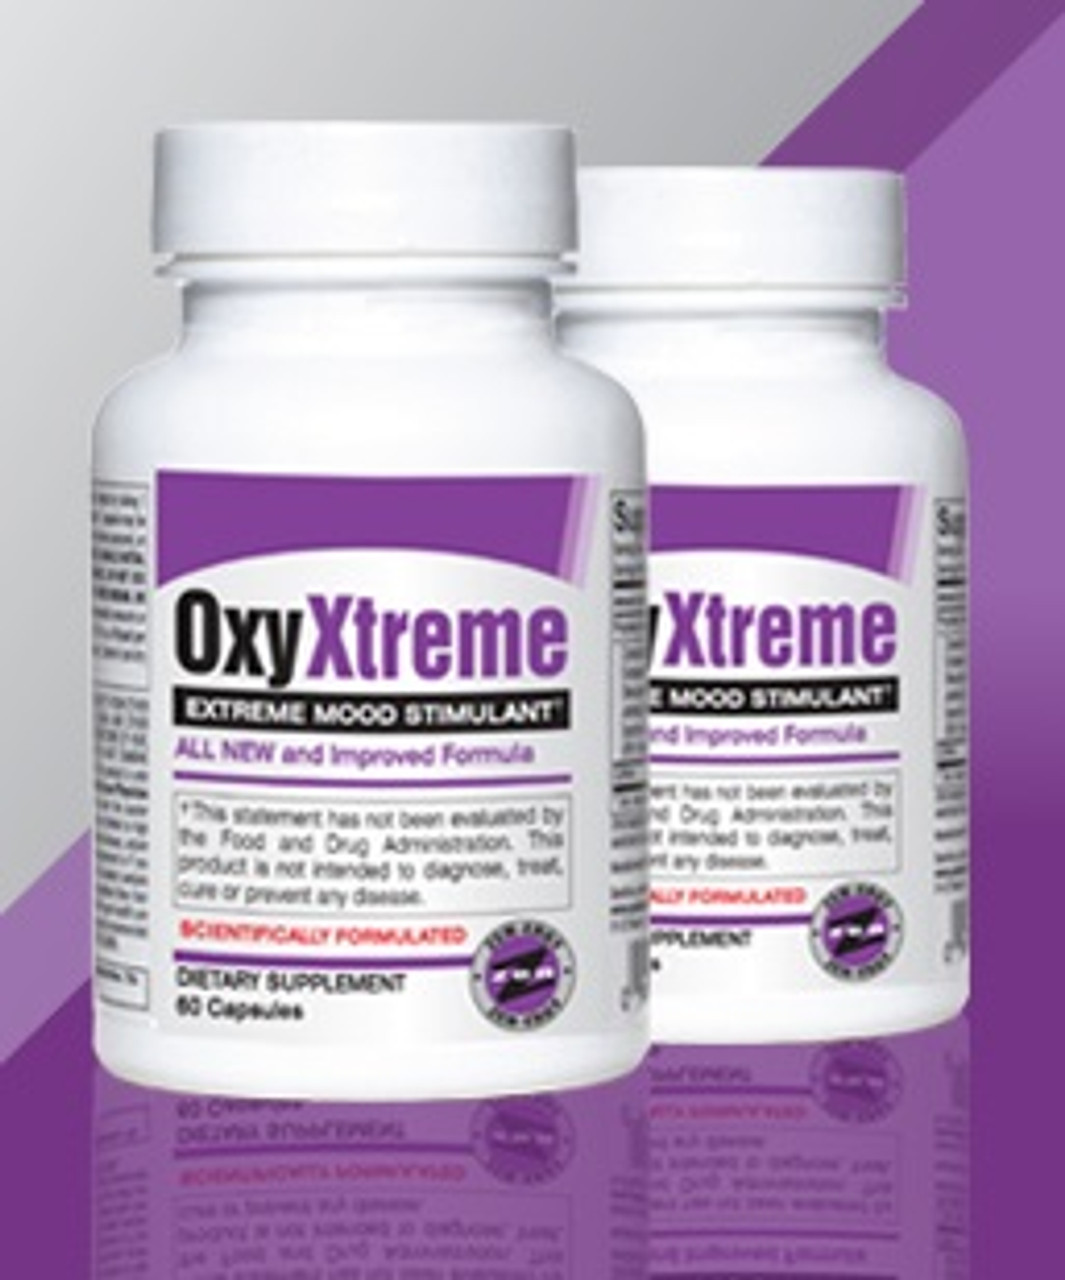 Oxy Xtreme Twin Pack Deal